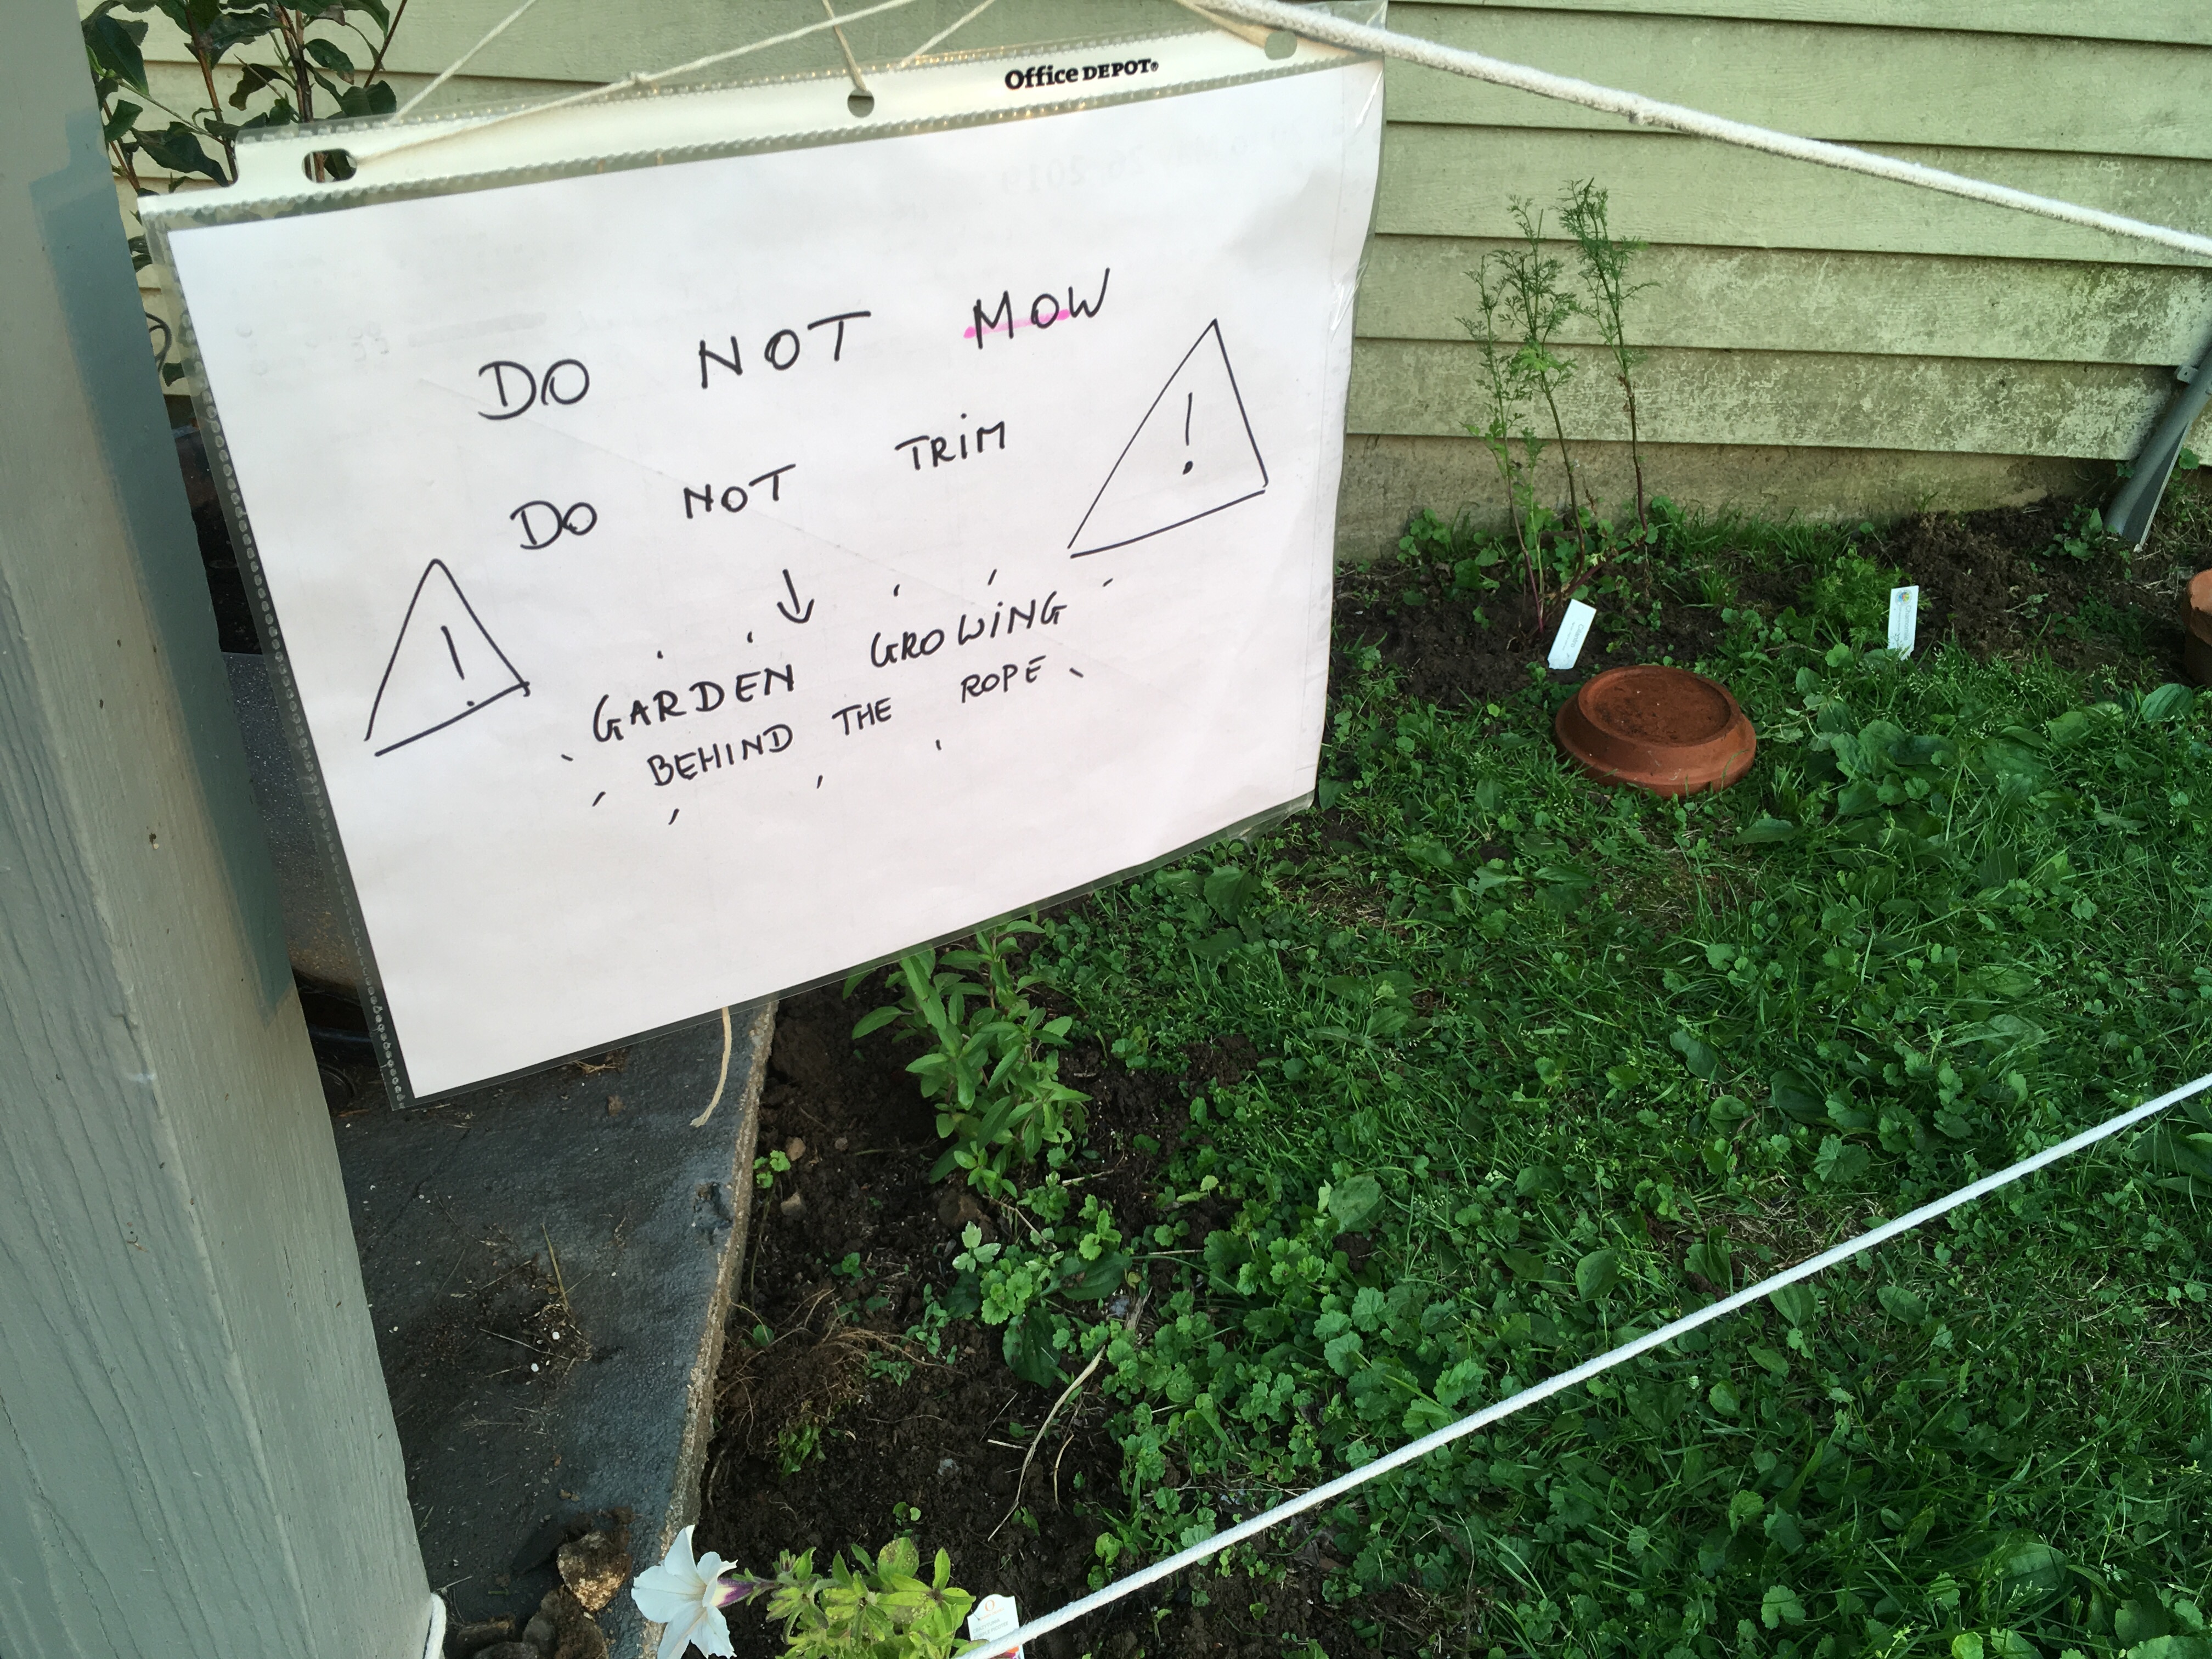 Handwritten sign to keep gardening crew out of newly planted area